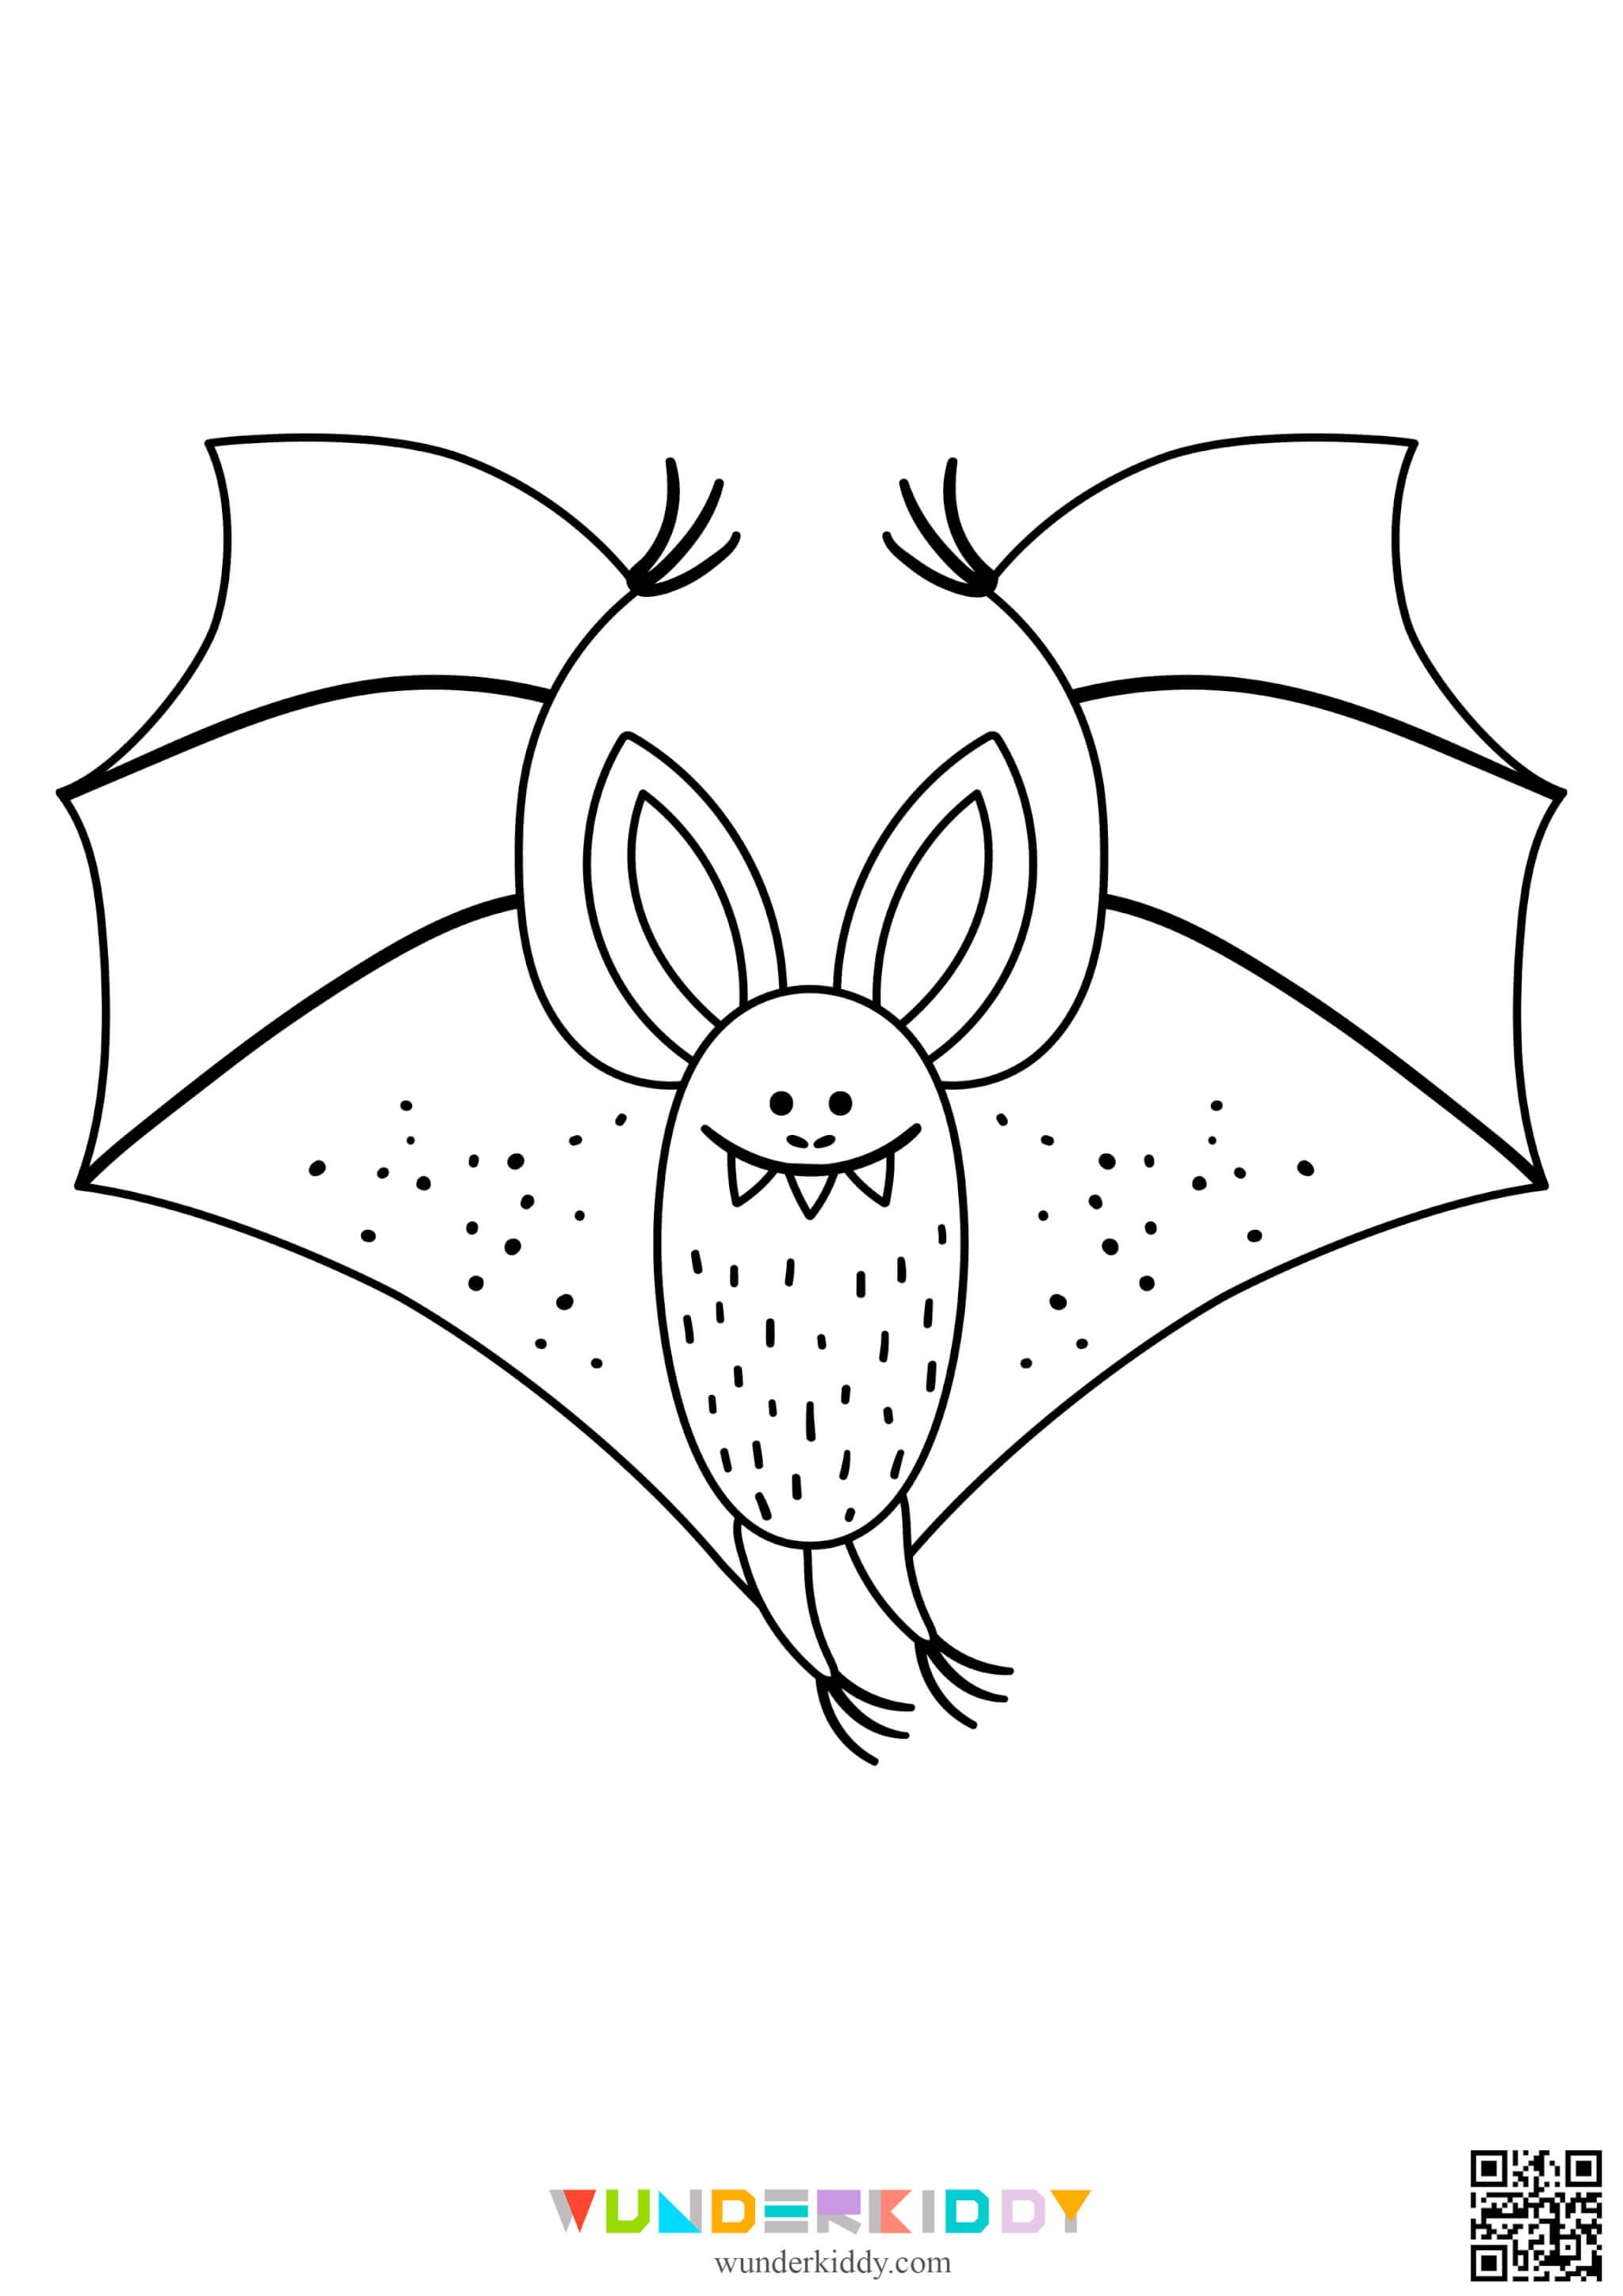 Halloween Coloring Pages - Image 3